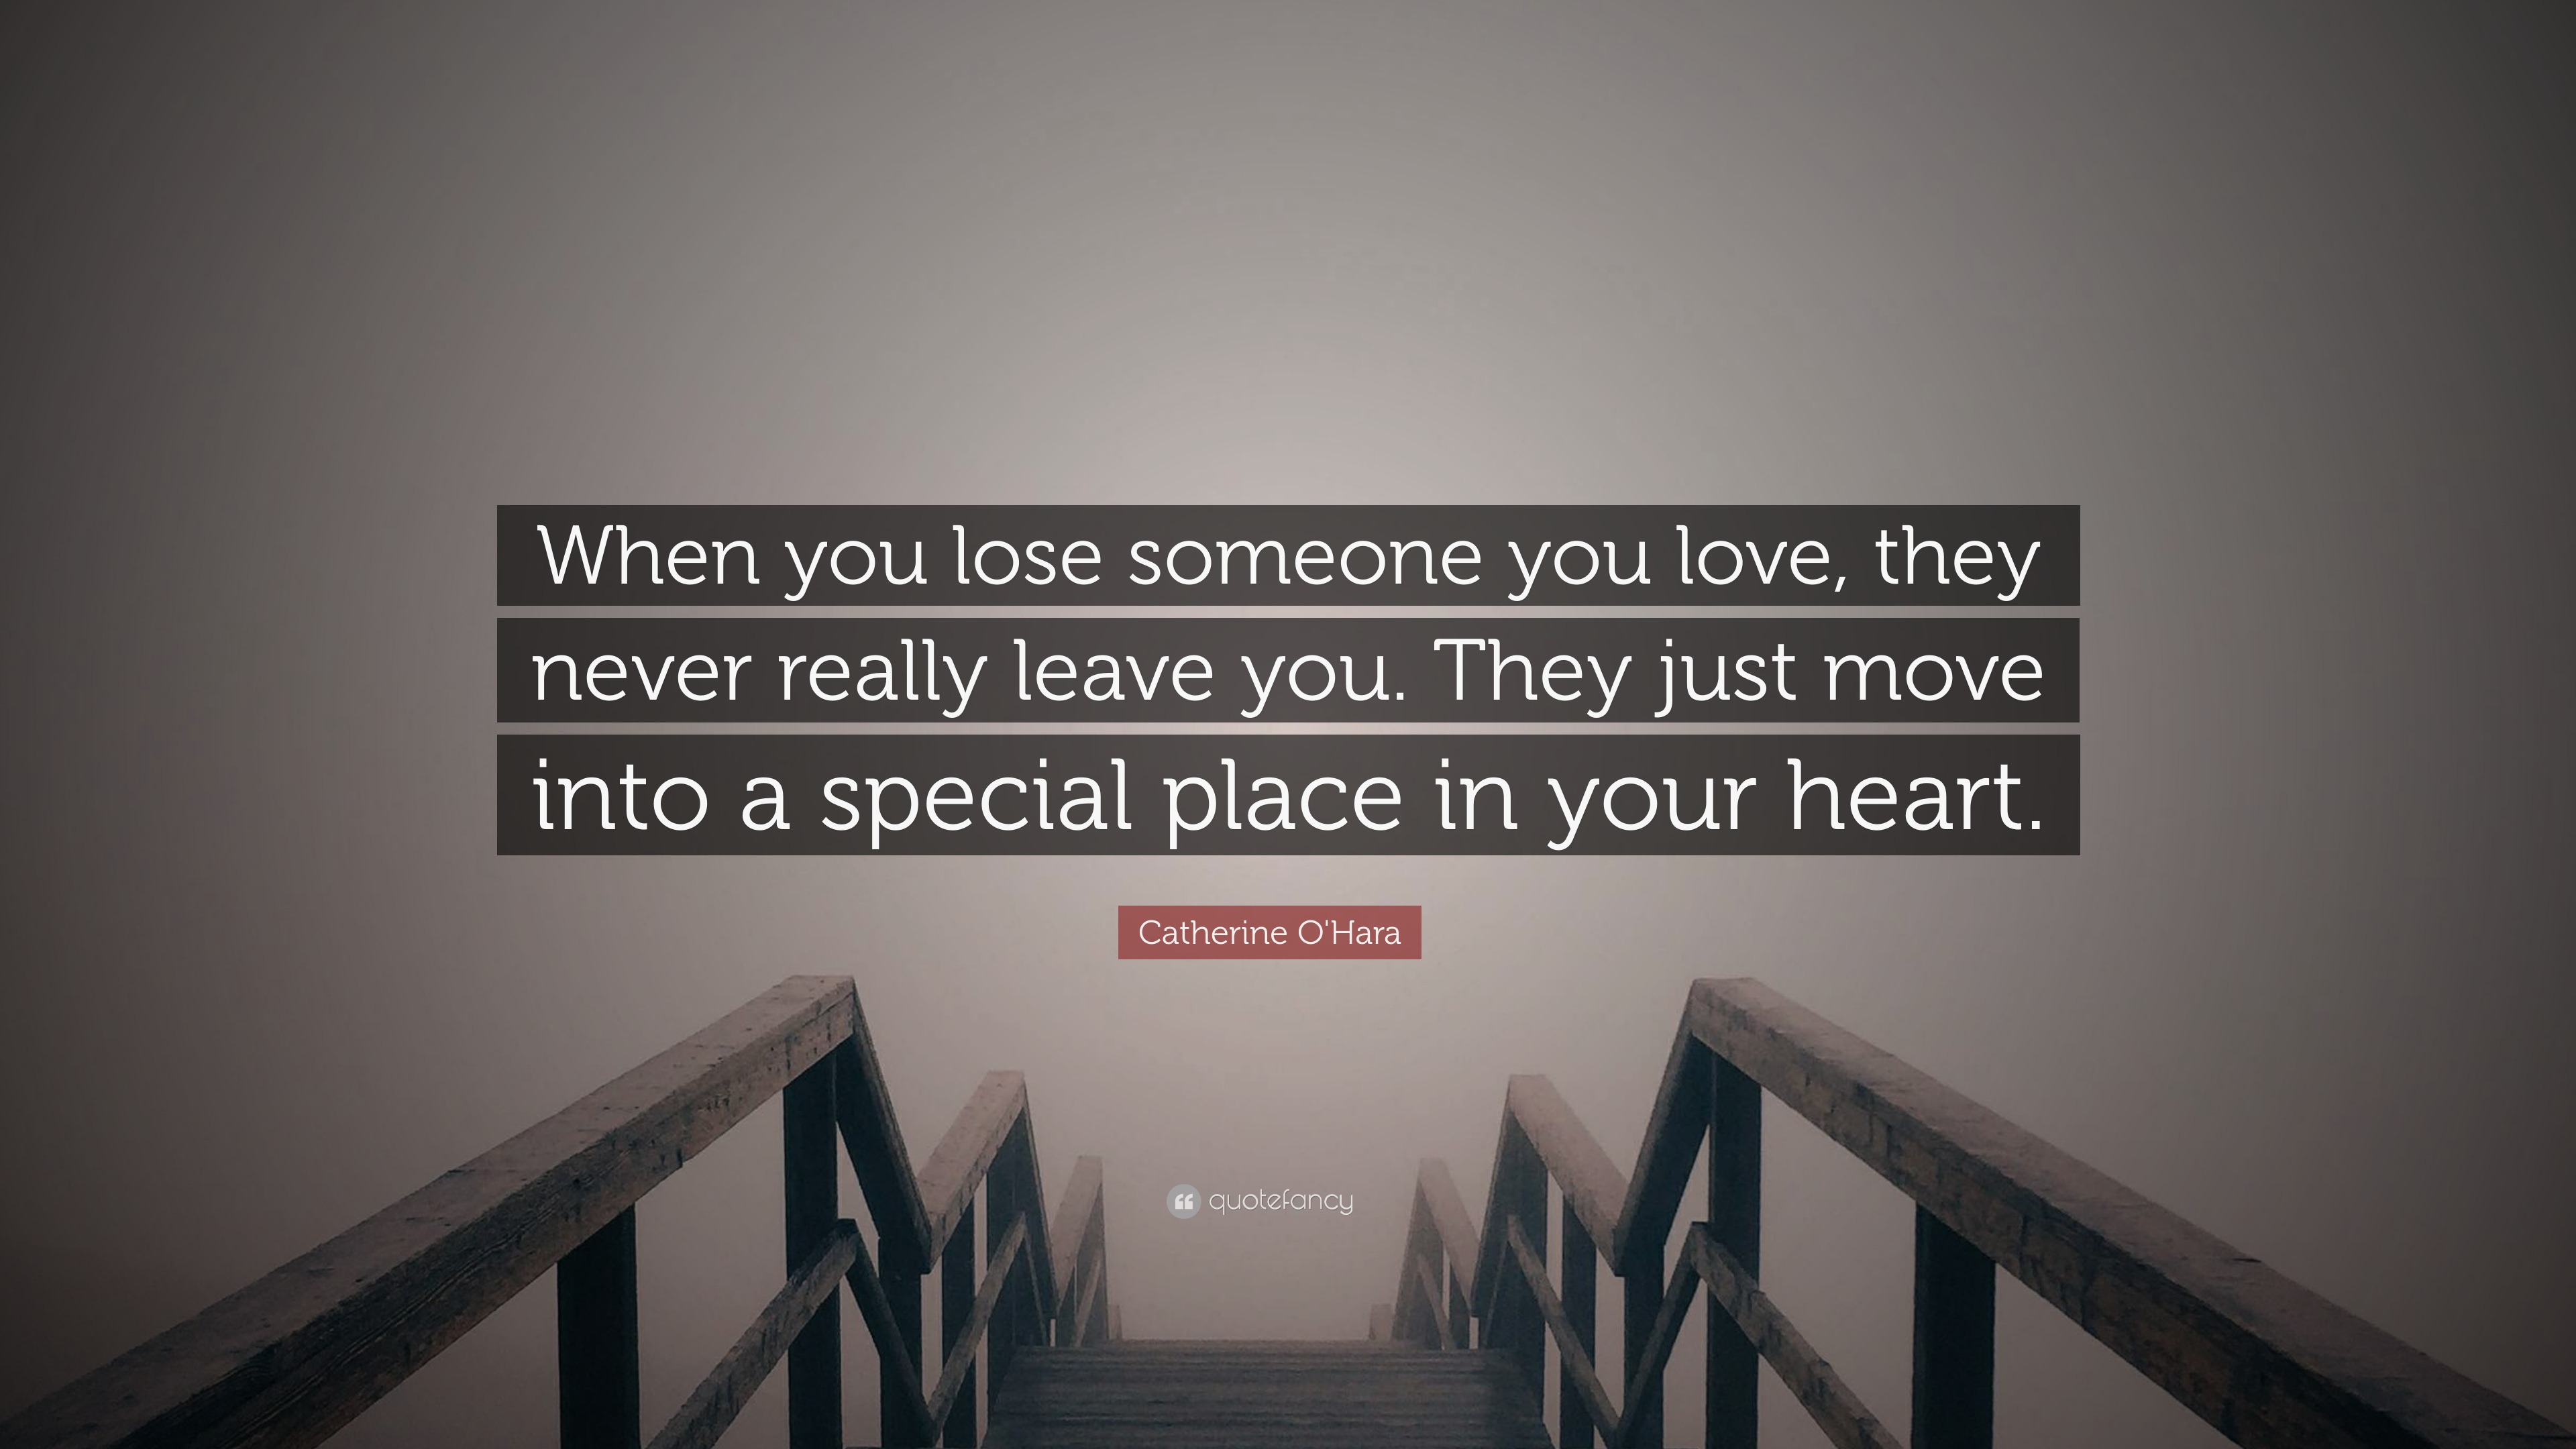 Quotes lose someone you when you love 60+ Quotes